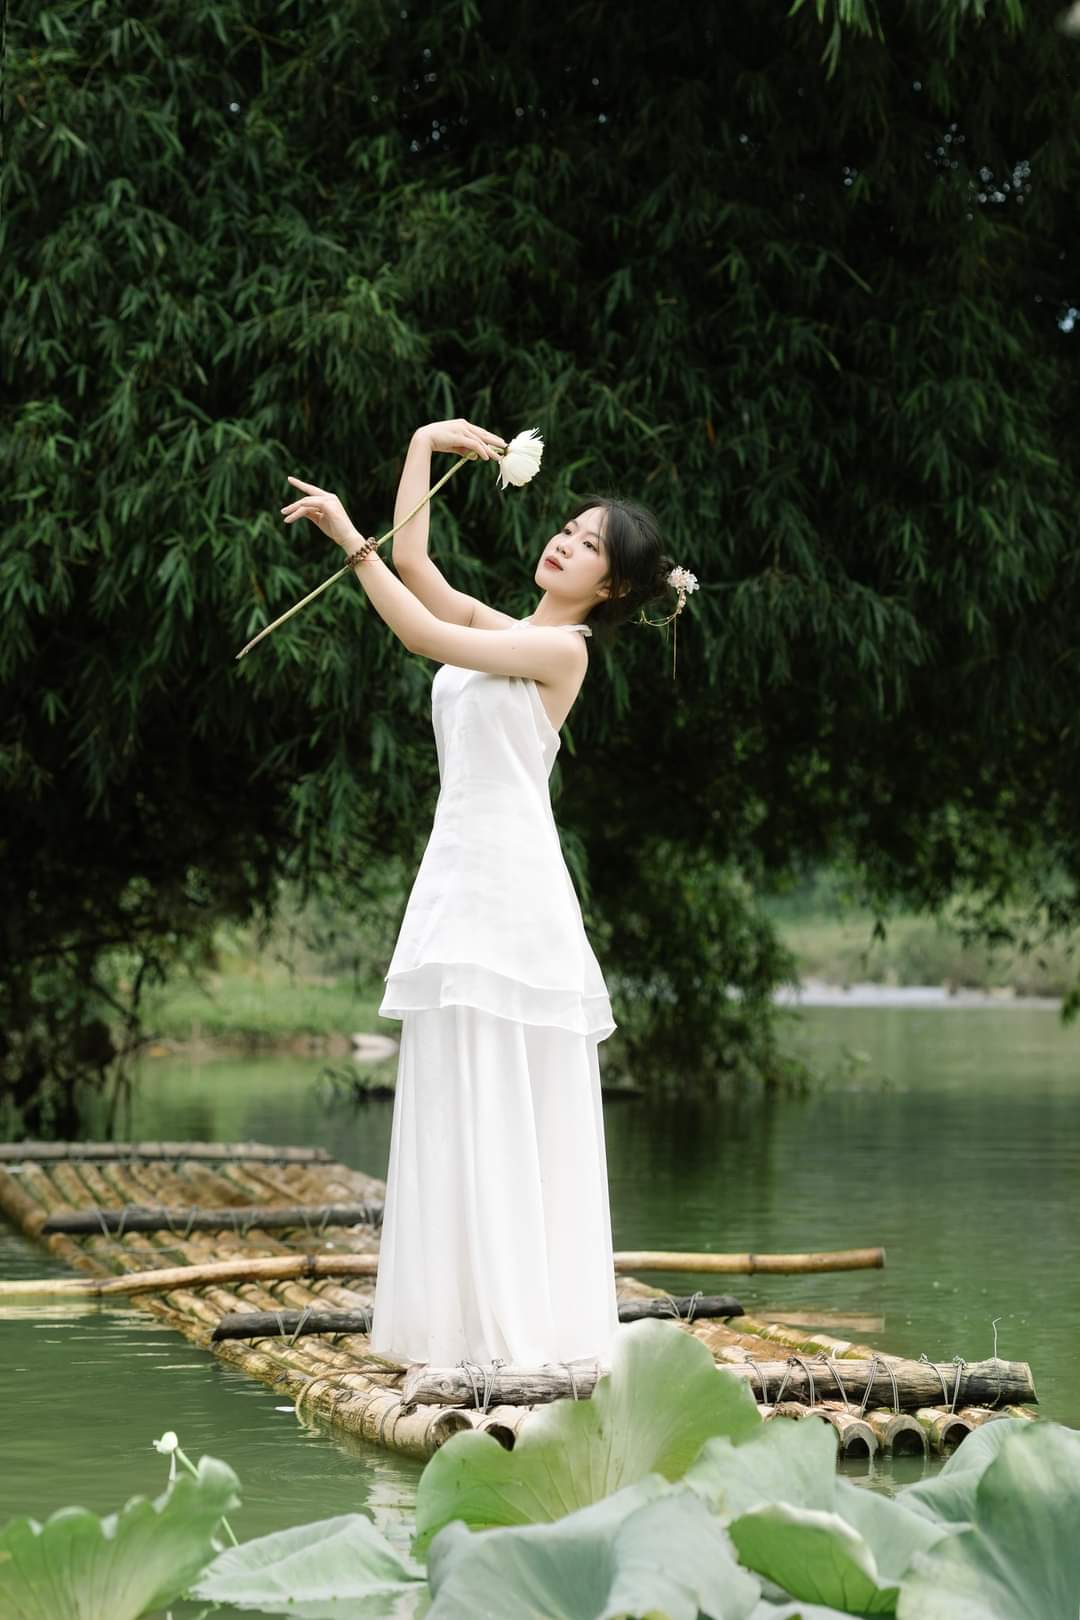 Vietnamese lady and river